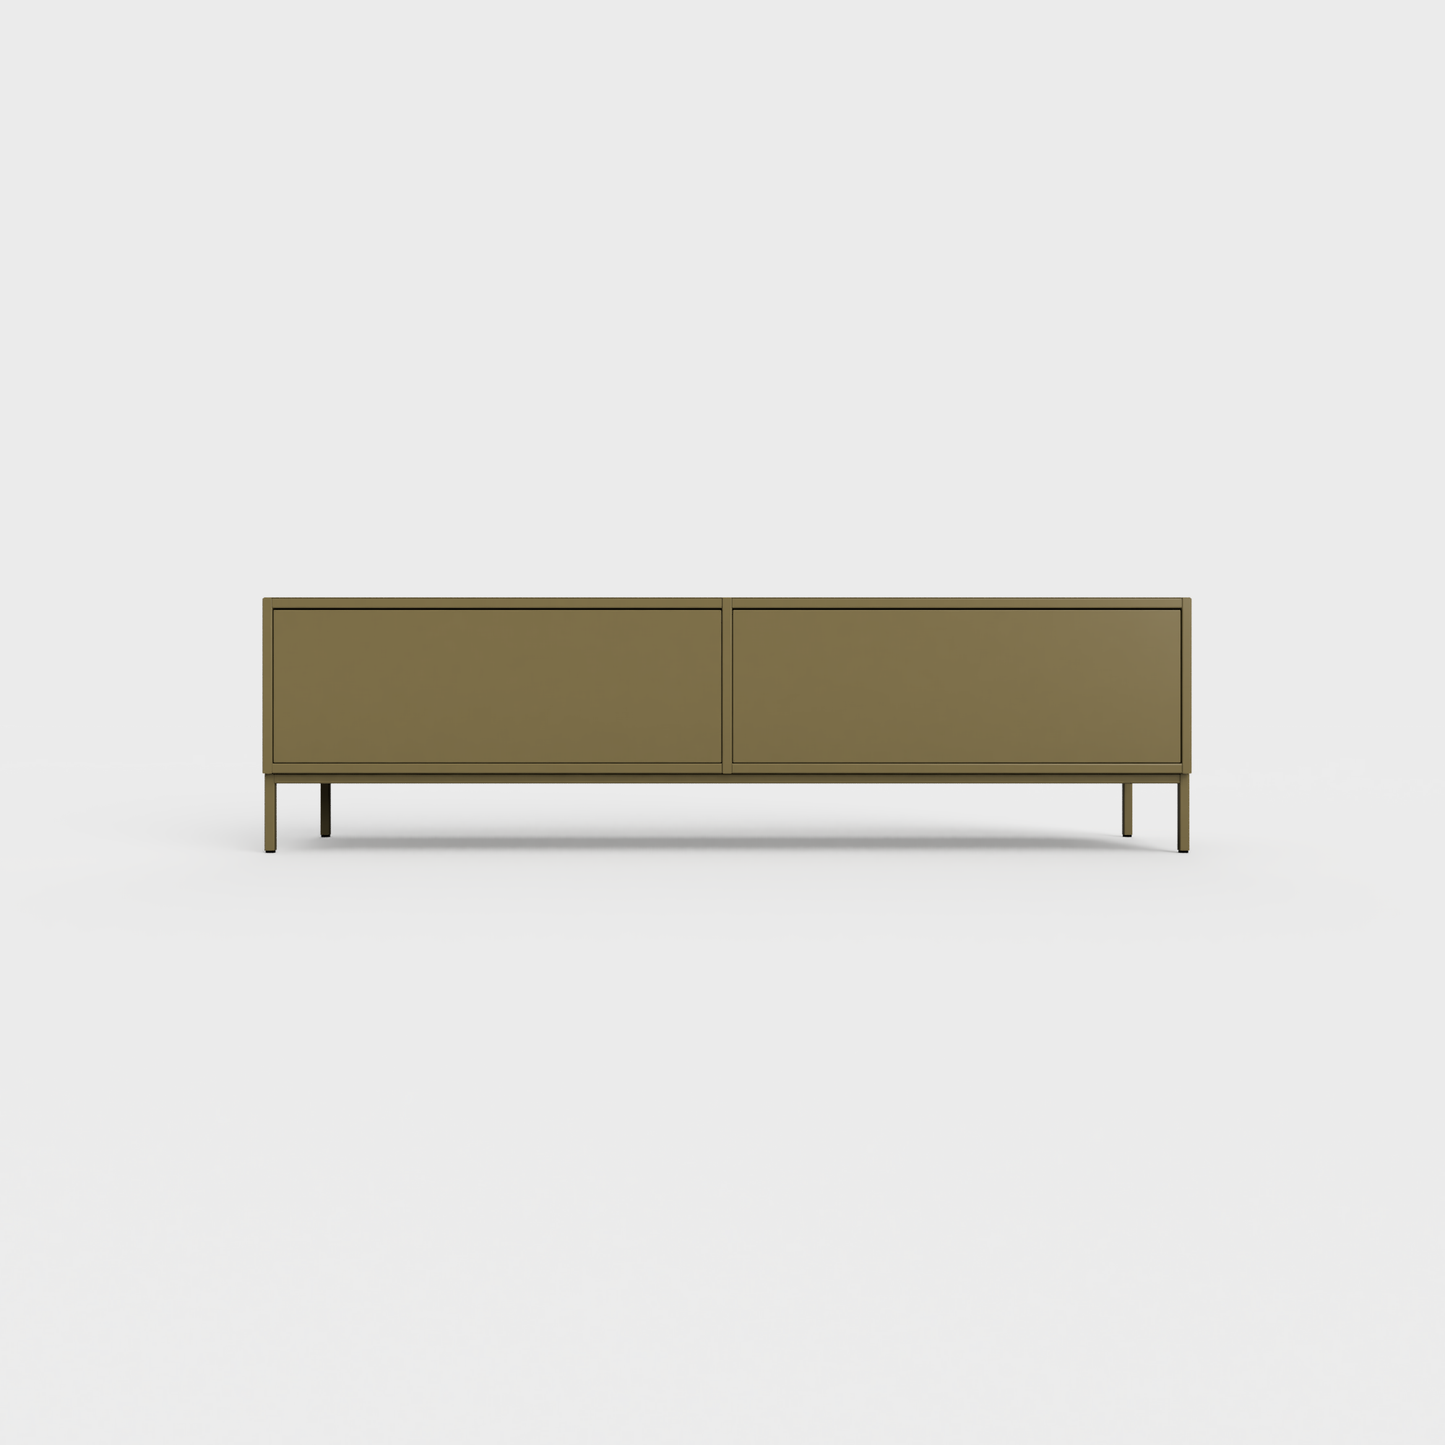 Prunus 01 Lowboard in Brown Olive color, powder-coated steel, elegant and modern piece of furniture for your living room